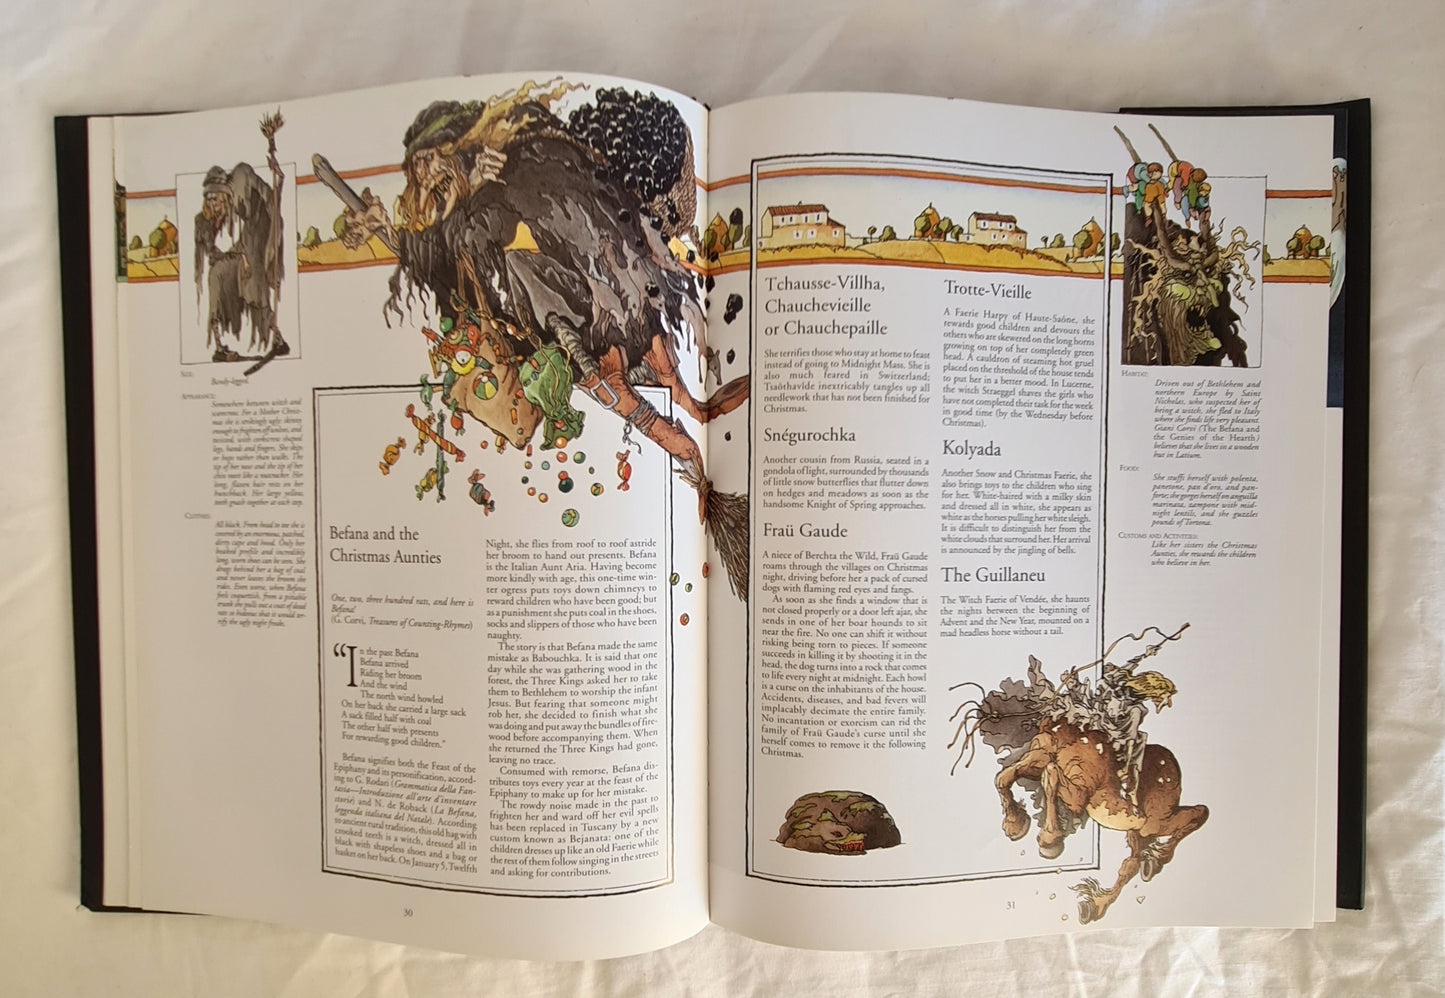 The Great Encyclopedia of Faeries by Pierre Dubois